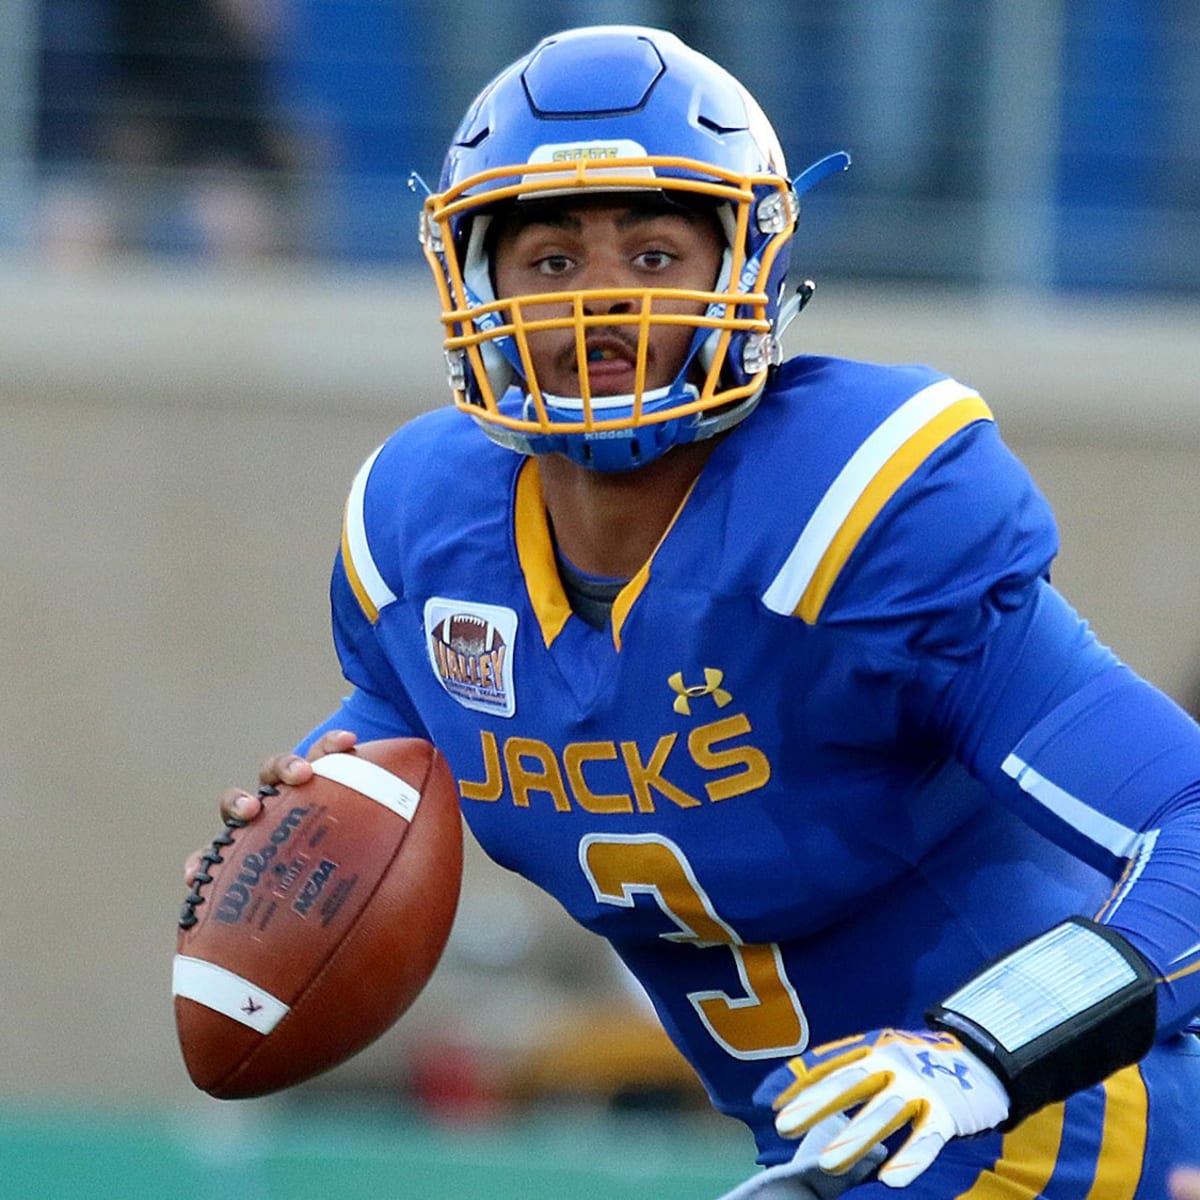 Predictions, picks for every FCS playoff game and round